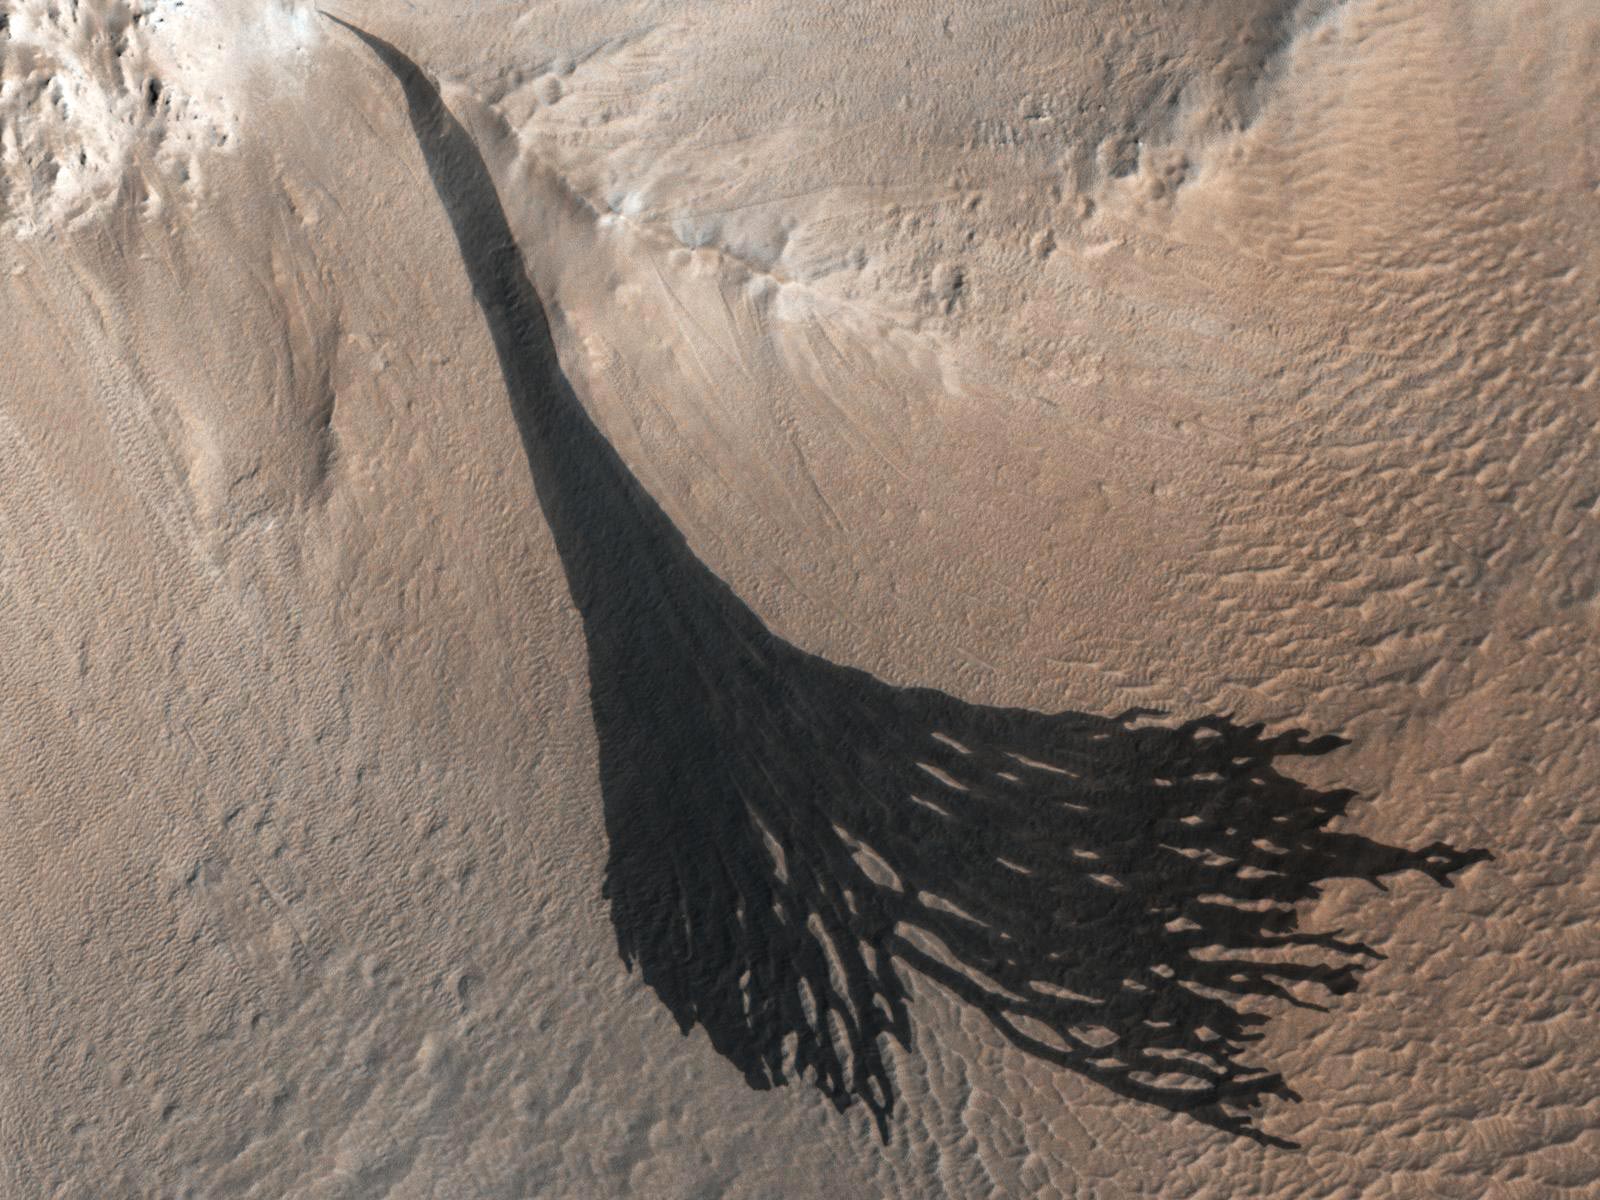 Cliff lines of dust avalanches on Mars